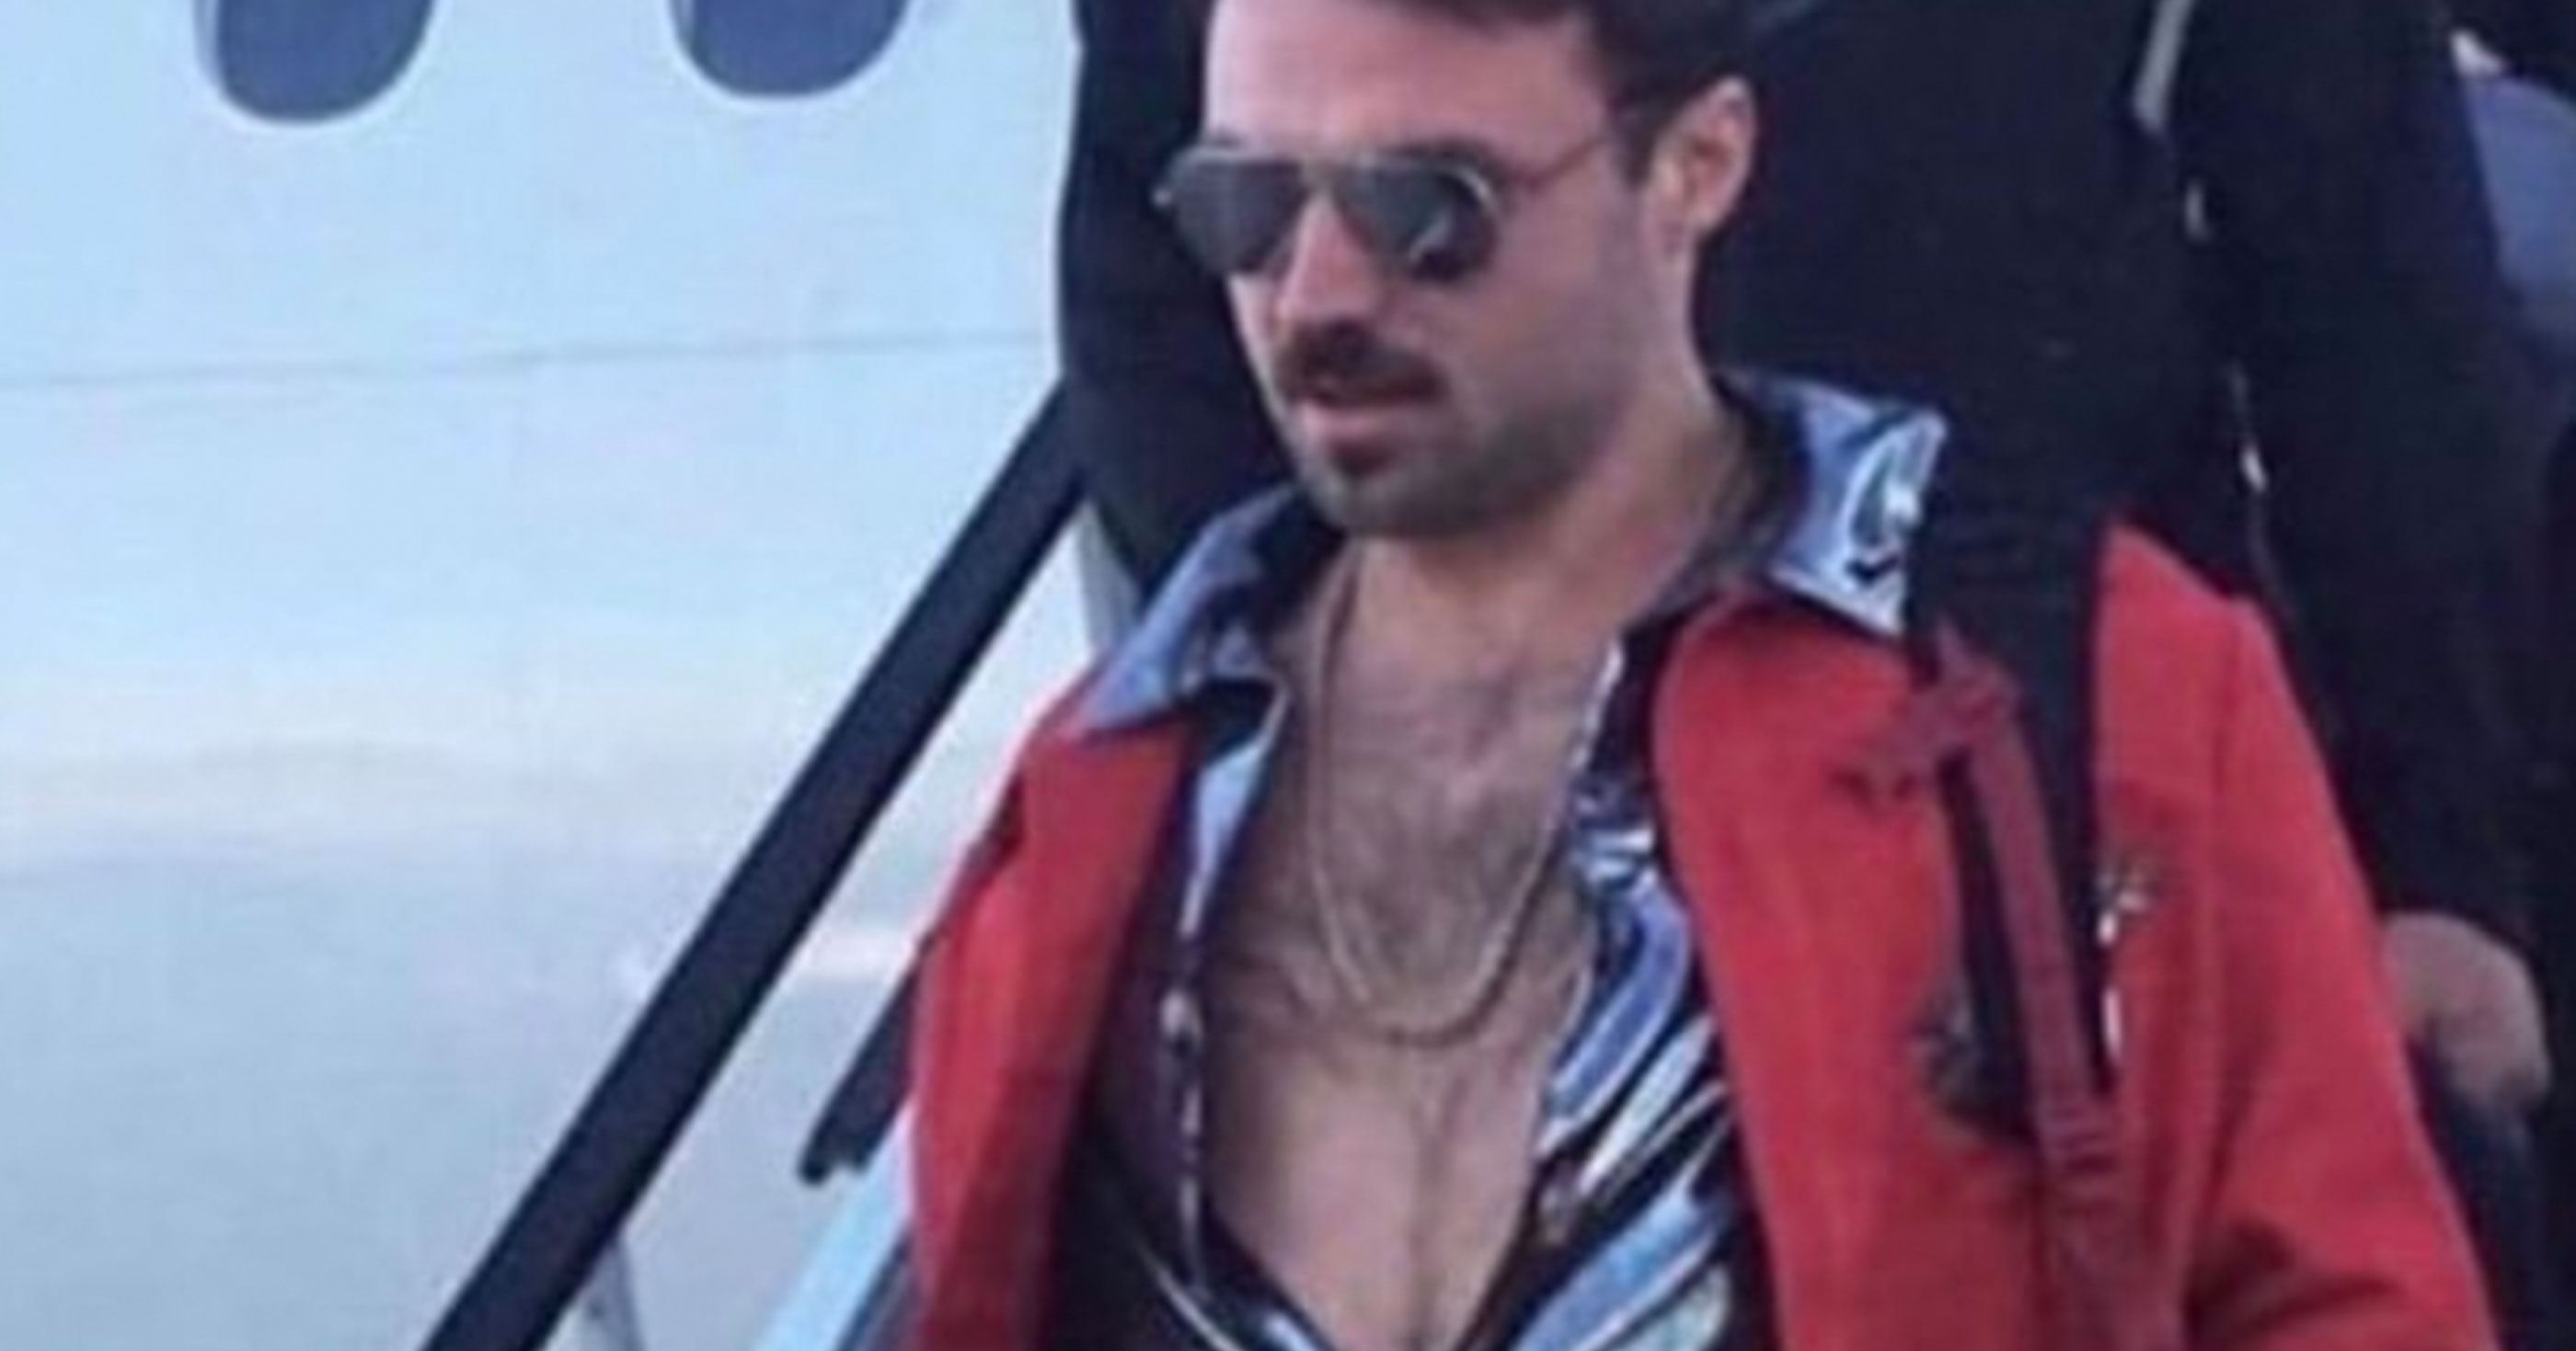 Porn From The 70s - Jaguars Rookie QB Gardner Minshew Gets Off Plane For Game ...